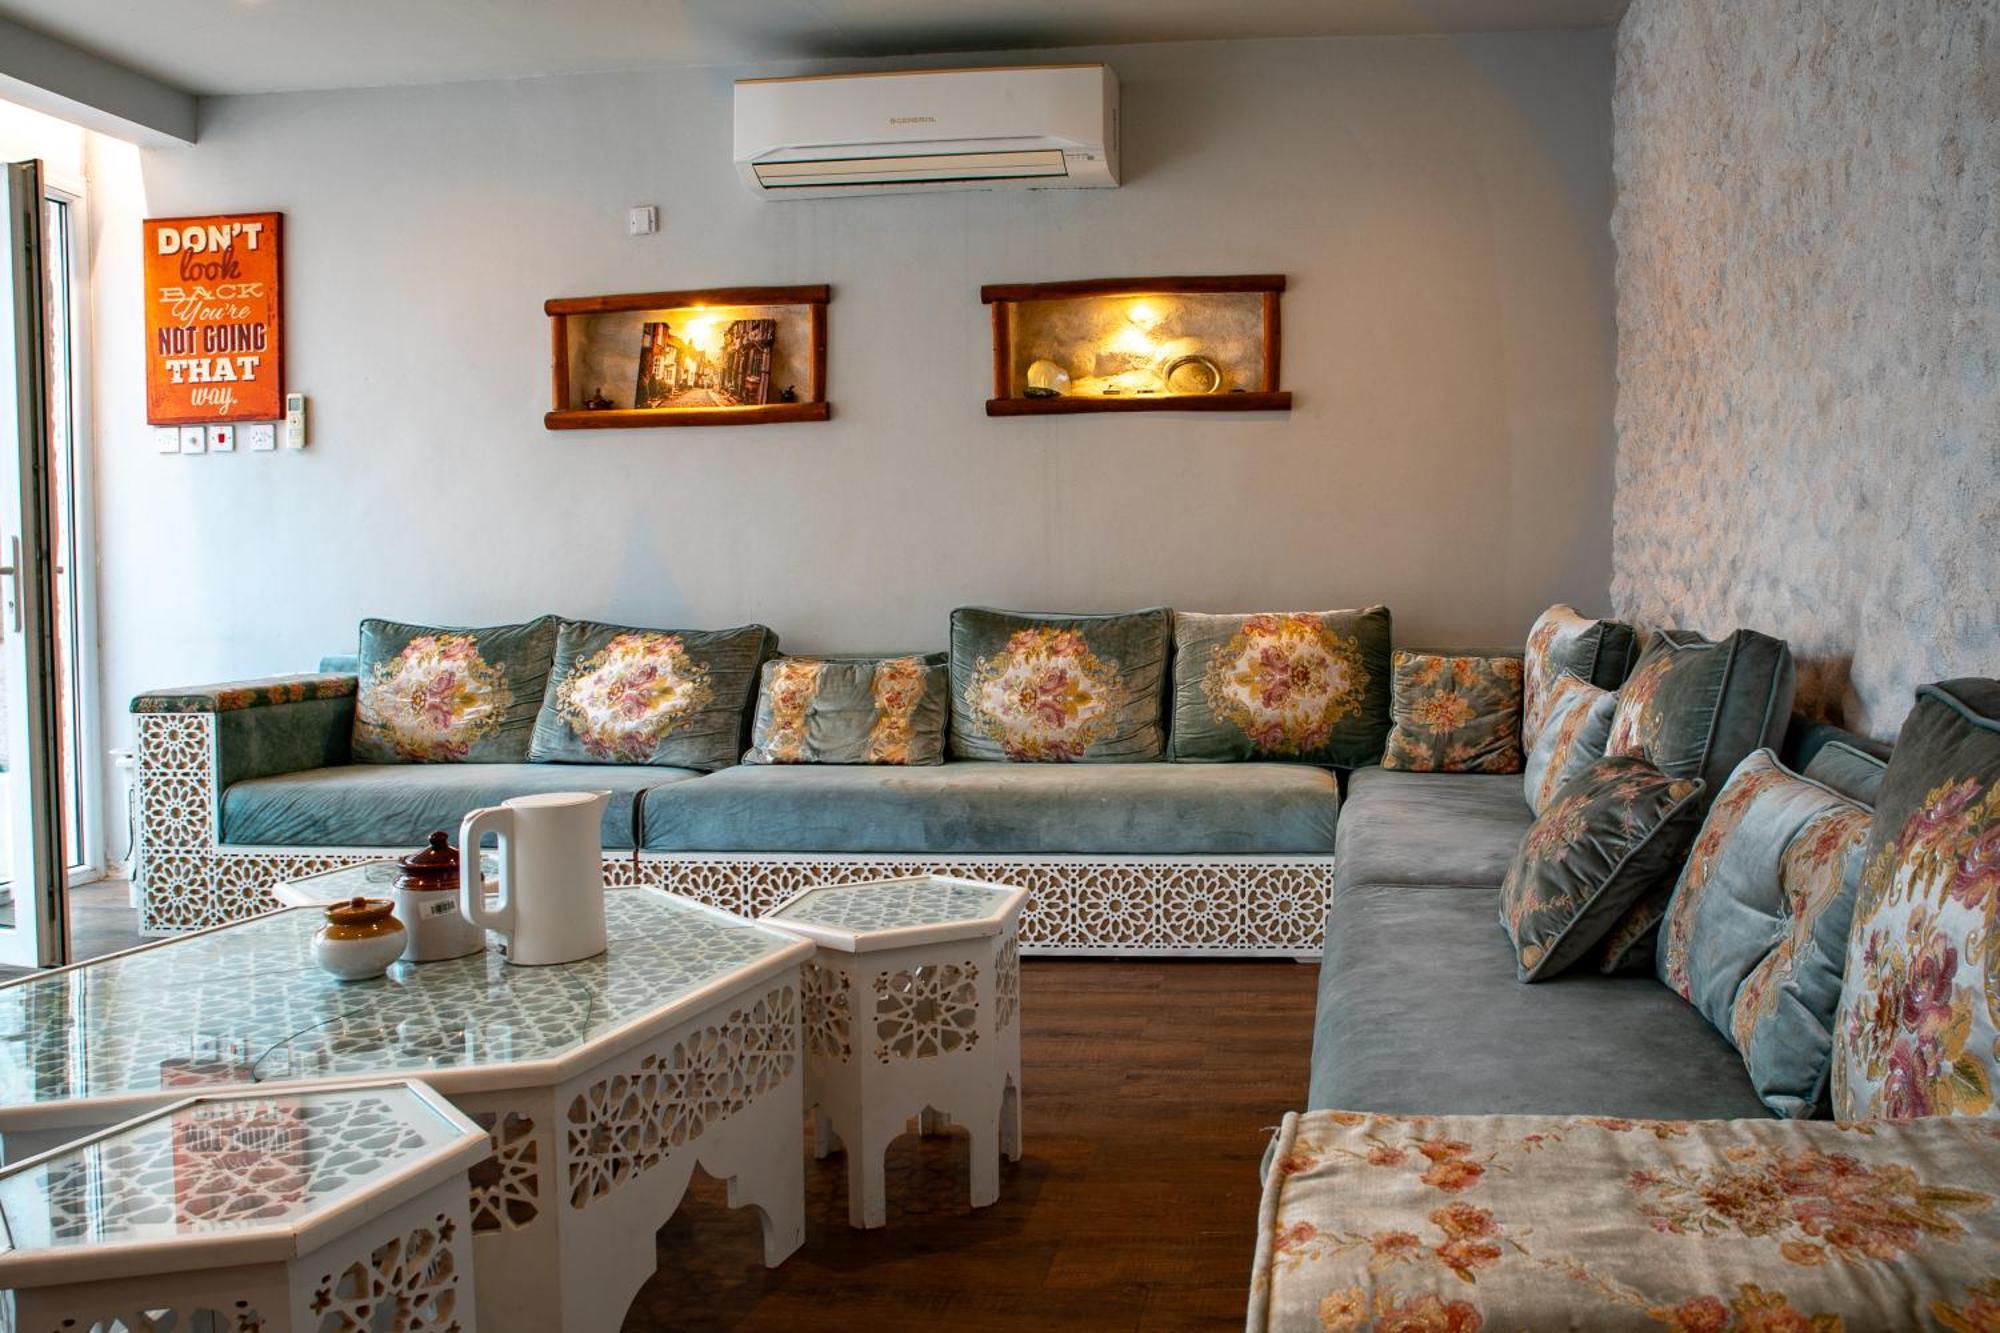 Elegant Garden Stay With 2 Living Areas, 2 Bedrooms, 1 Full And 1 Half Bath For 6 Guests Umm Al Amad Zewnętrze zdjęcie